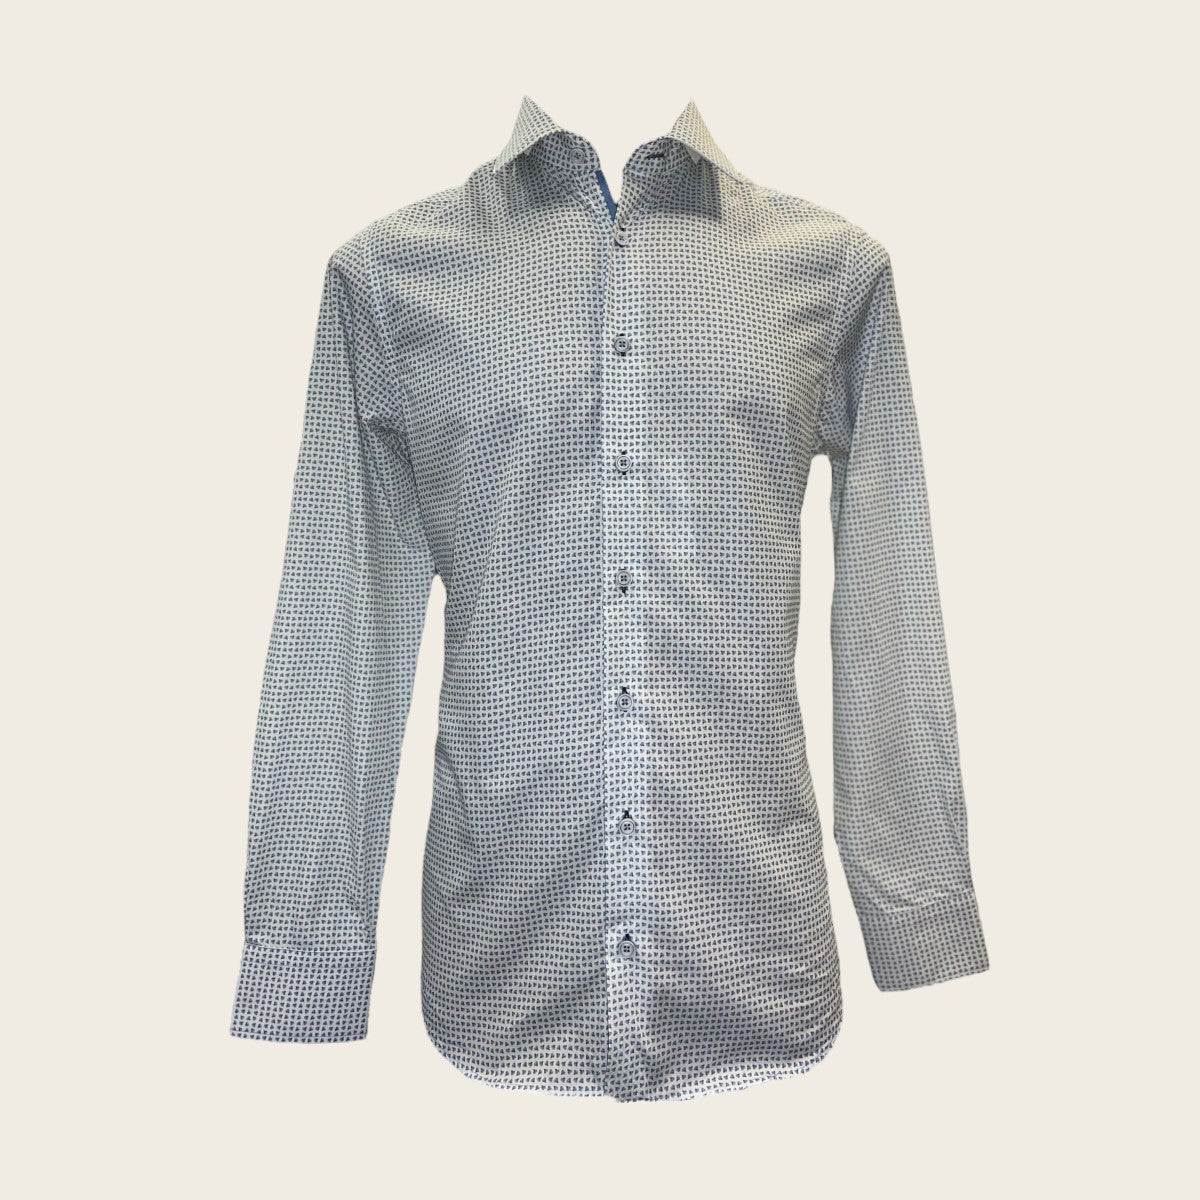 Grey shirt for men with print in contrasting colors